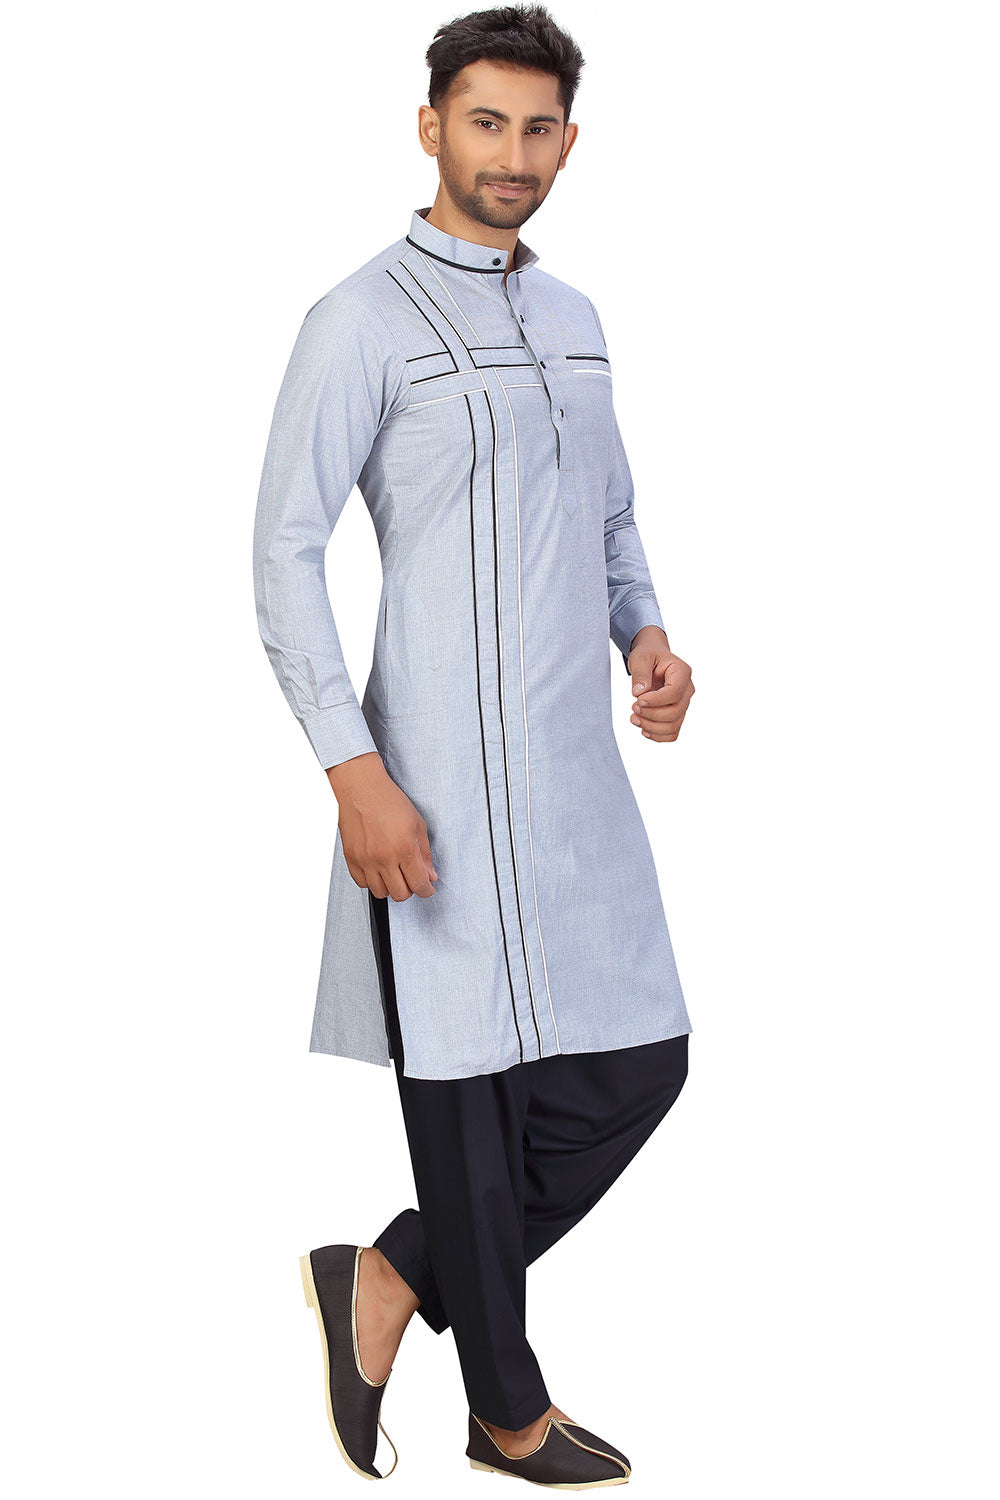 Buy Men's Blended Cotton Solid Pathani Set in Sky Blue Online - Zoom Out